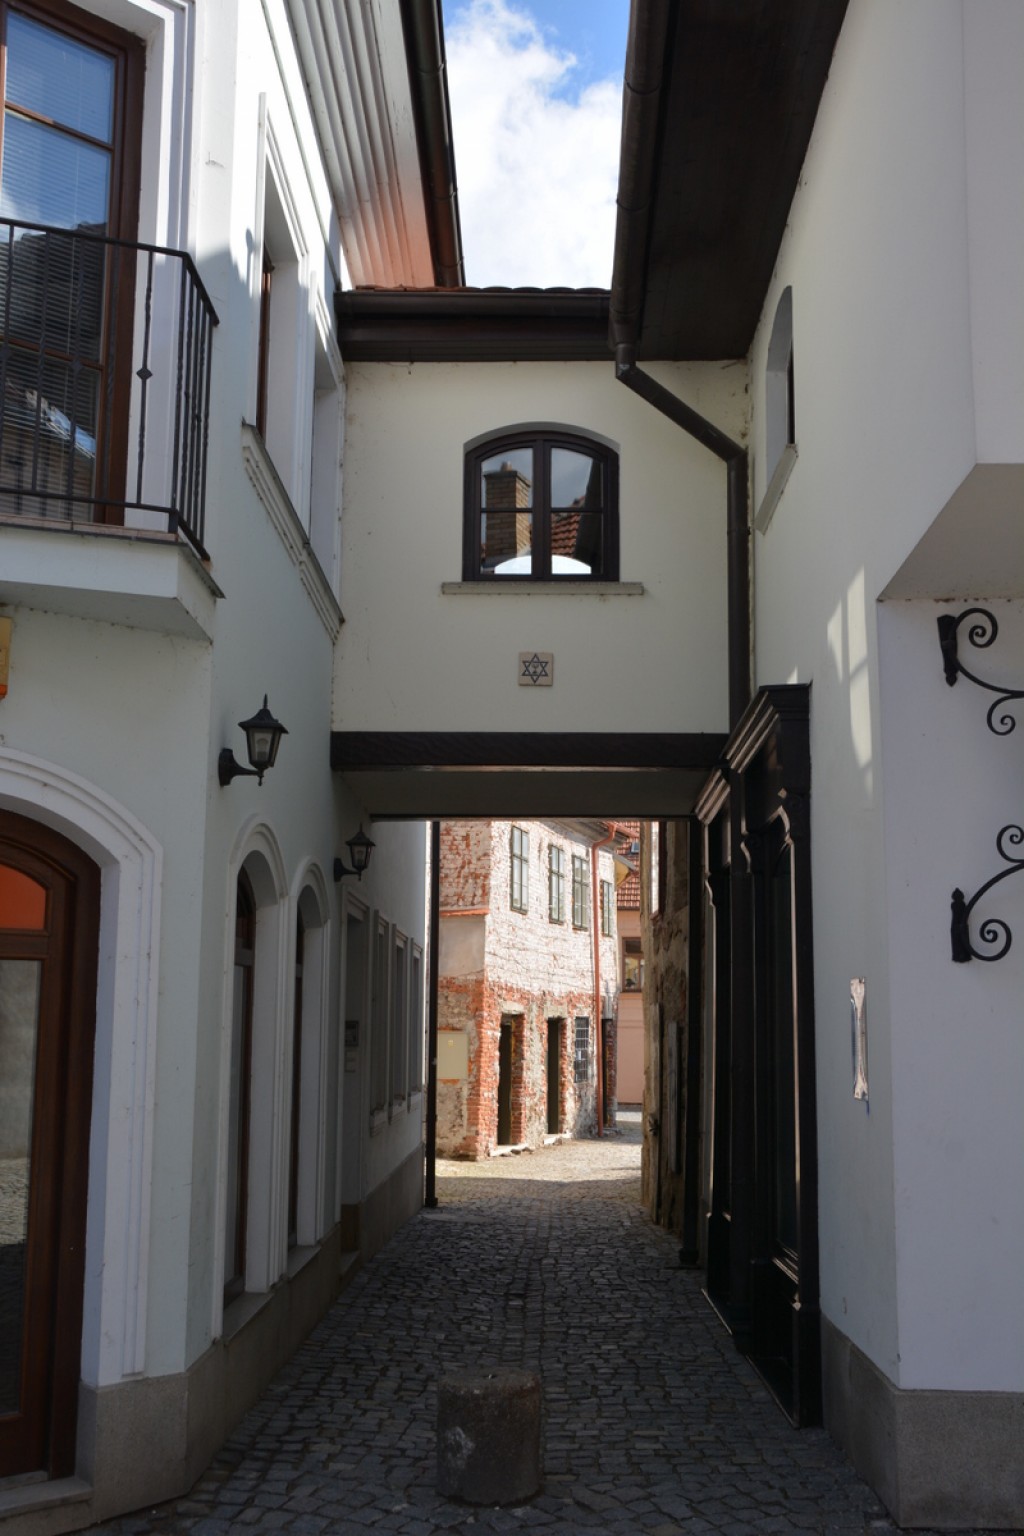 We really enjoyed our 2 nights in Trebic.  We used it as a base to visit the Moravian Karst region, and also really enjoyed the sights and feel of staying in the very well preserved old town.  And for our modern conveniences, the new town was only a 5 minute walk away.